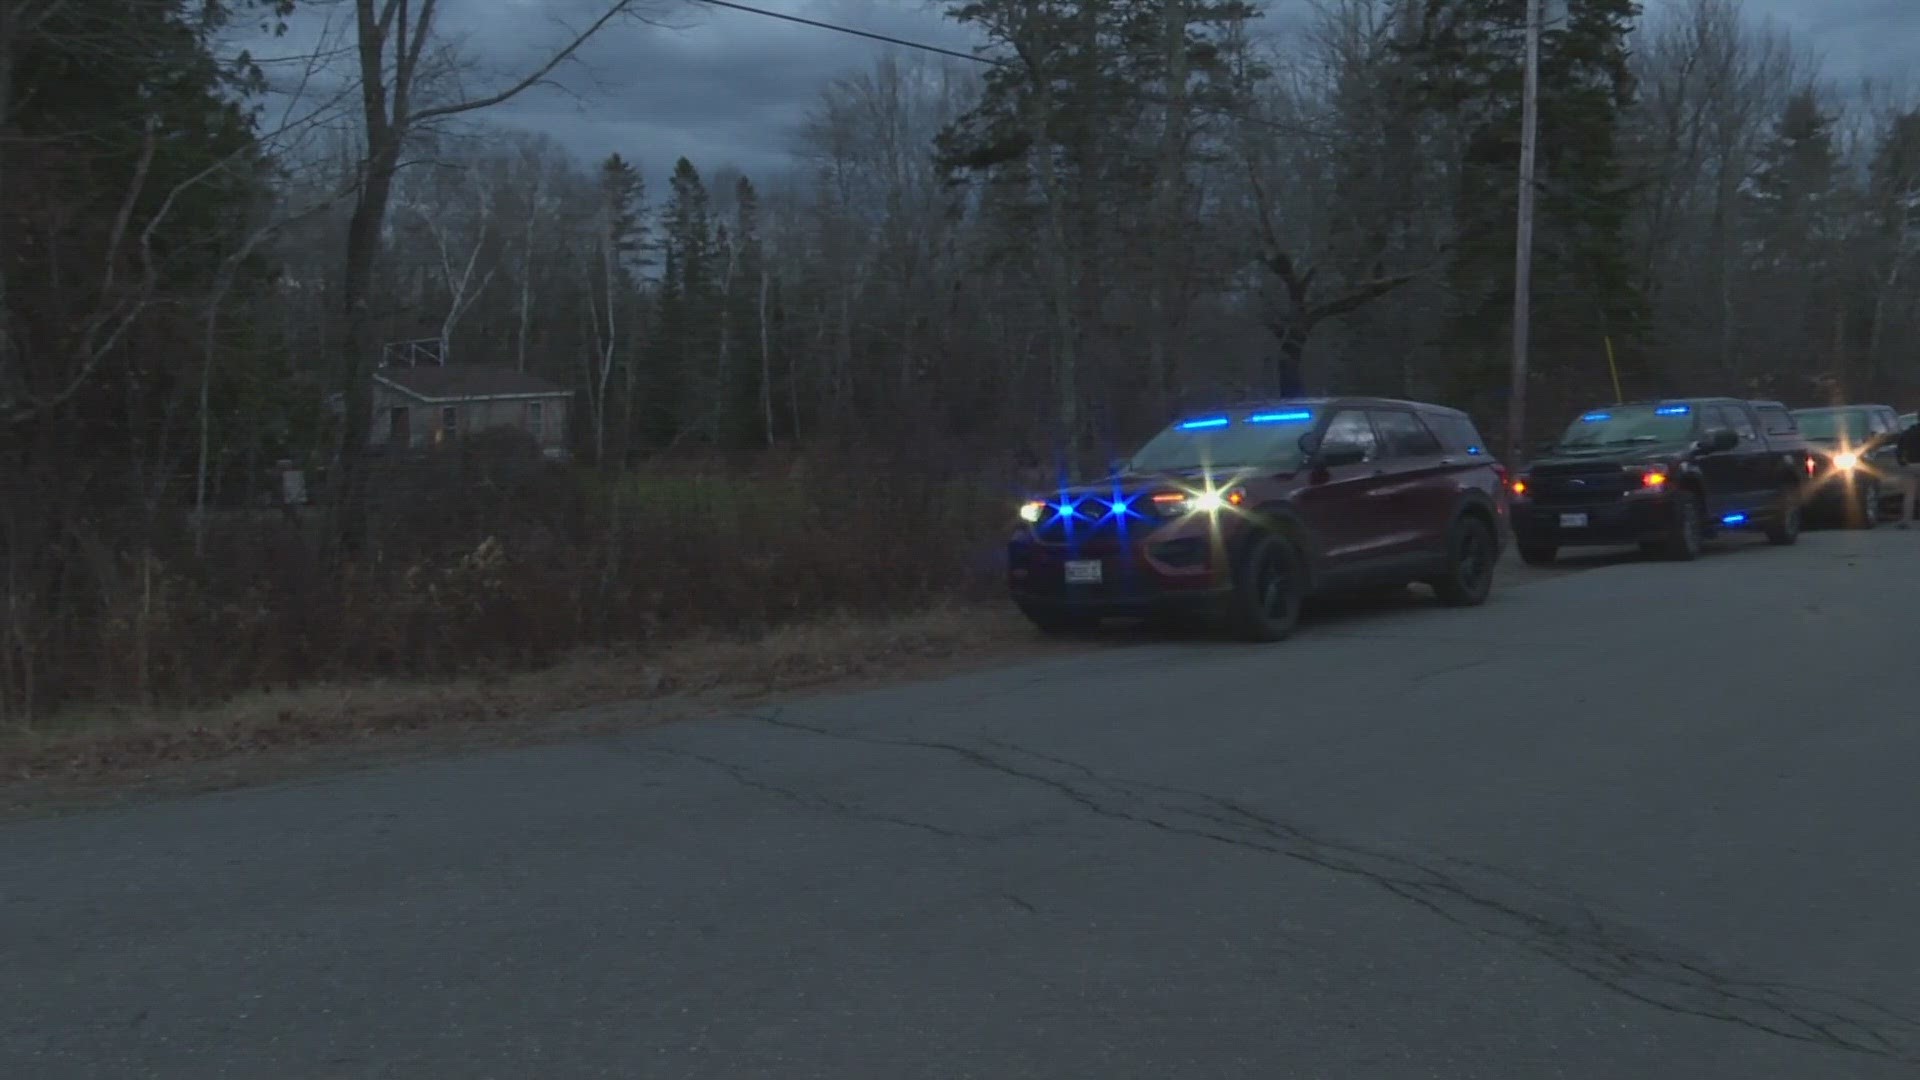 The Maine Department of Public Safety on Tuesday publicly identified the people involved.